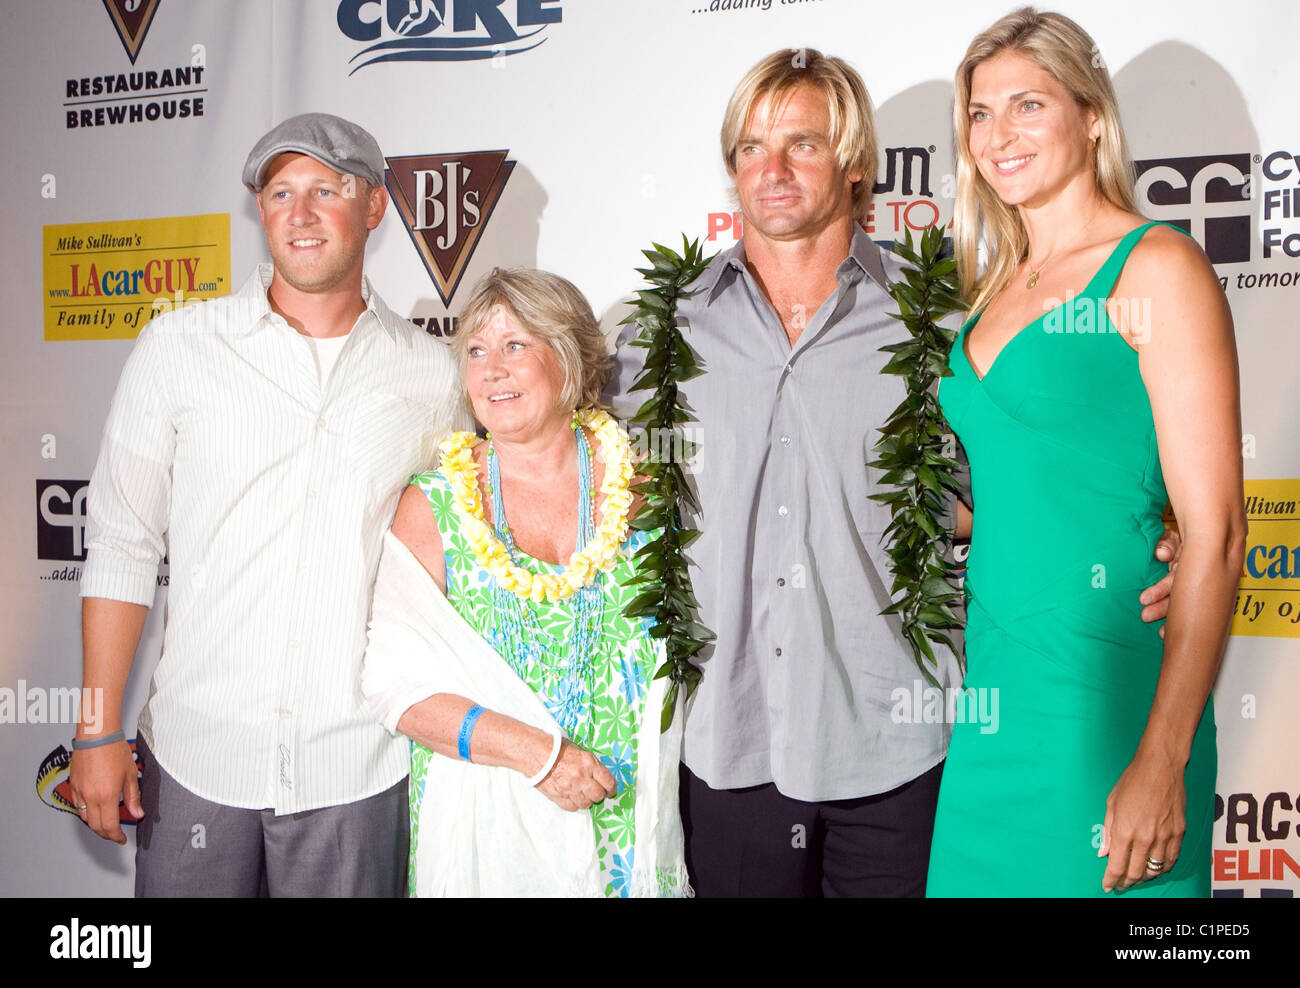 Laird Hamilton and his wife Gabrielle Reece with guests The Pacsun Pipeline Campaign Fundraiser for Cystic Fibrosis held in the Stock Photo